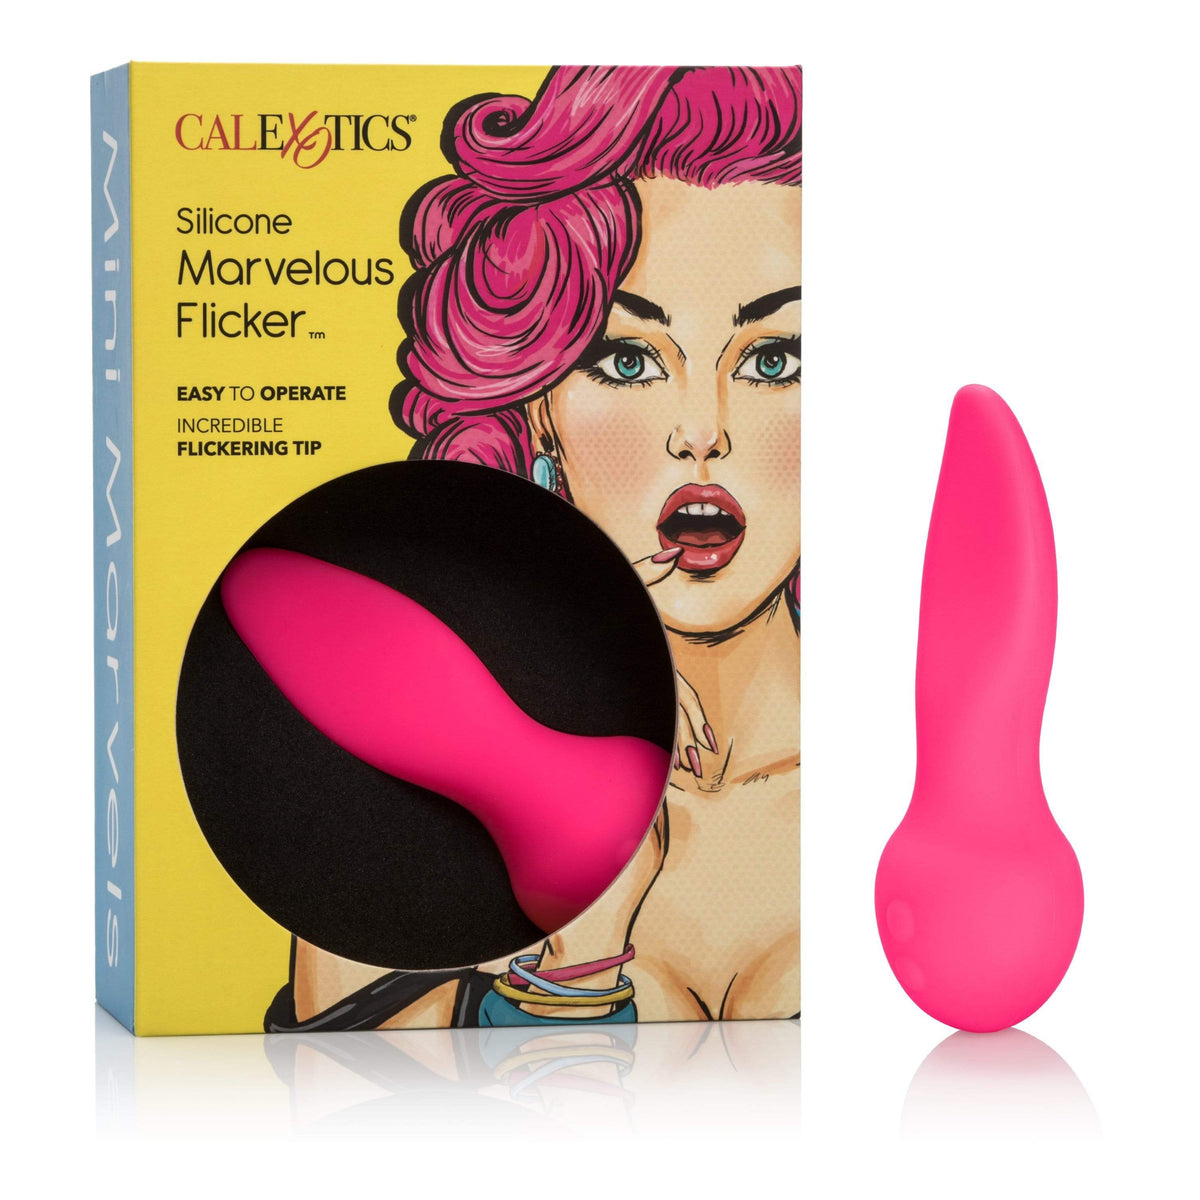 California Exotics - Mini Marvels Silicone Marvelous Flicker Clit Massager (Pink) Clit Massager (Vibration) Rechargeable 716770087584 CherryAffairs